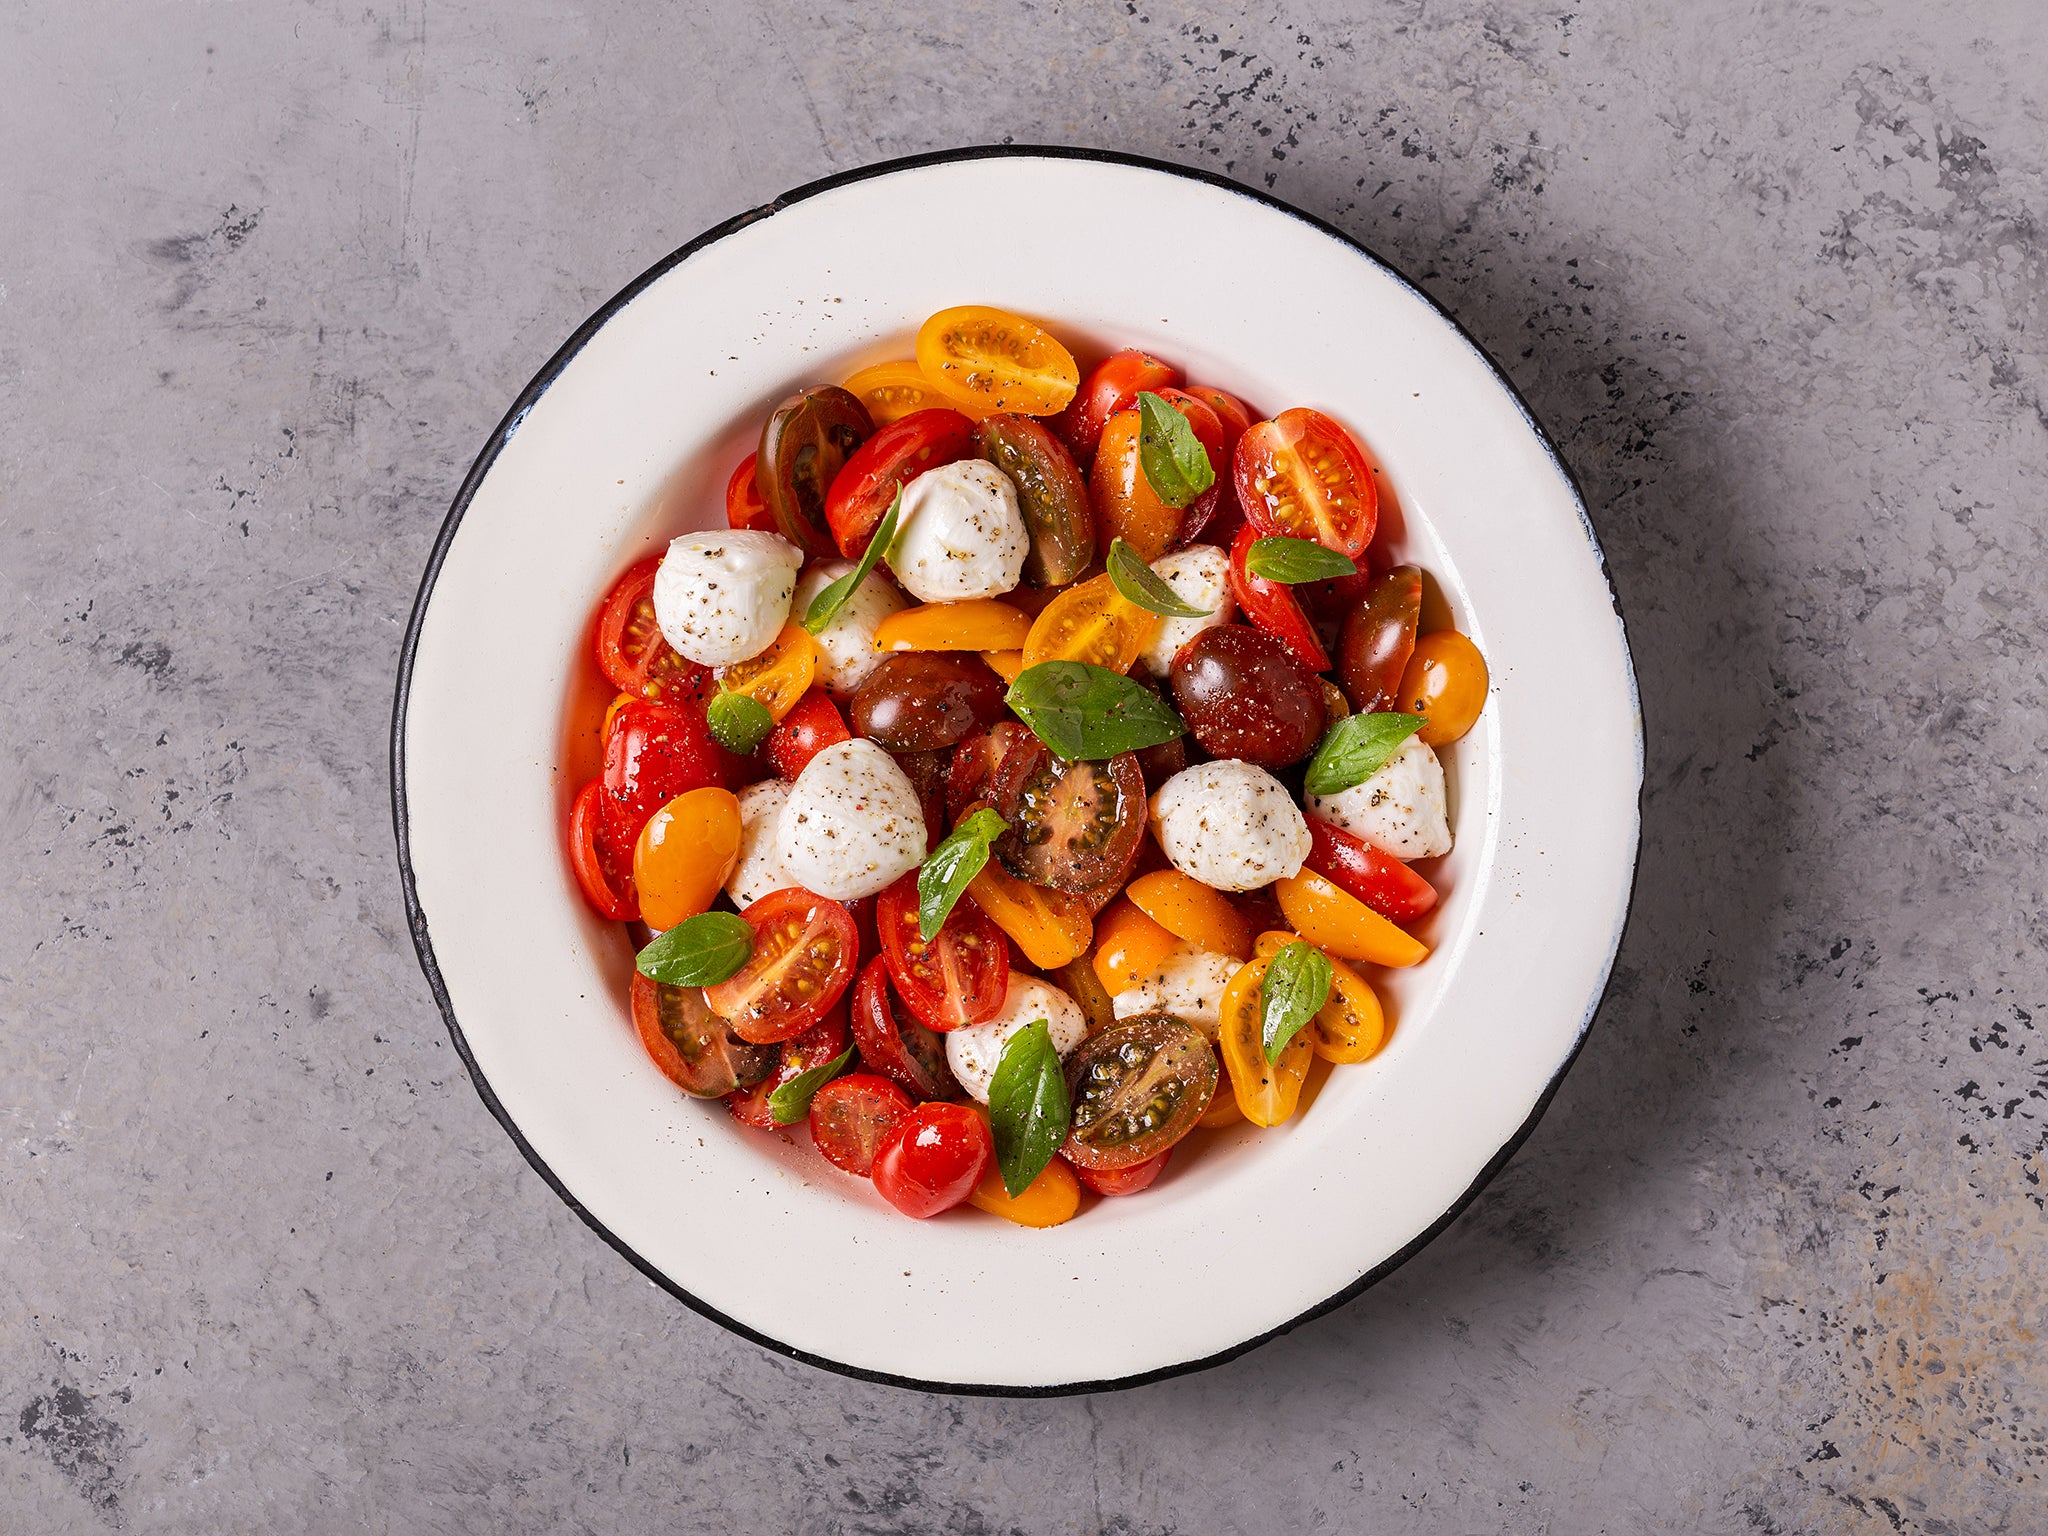 This simple dish is best, of course, when cherry tomatoes are in season – that it gets better as it sits is a boon